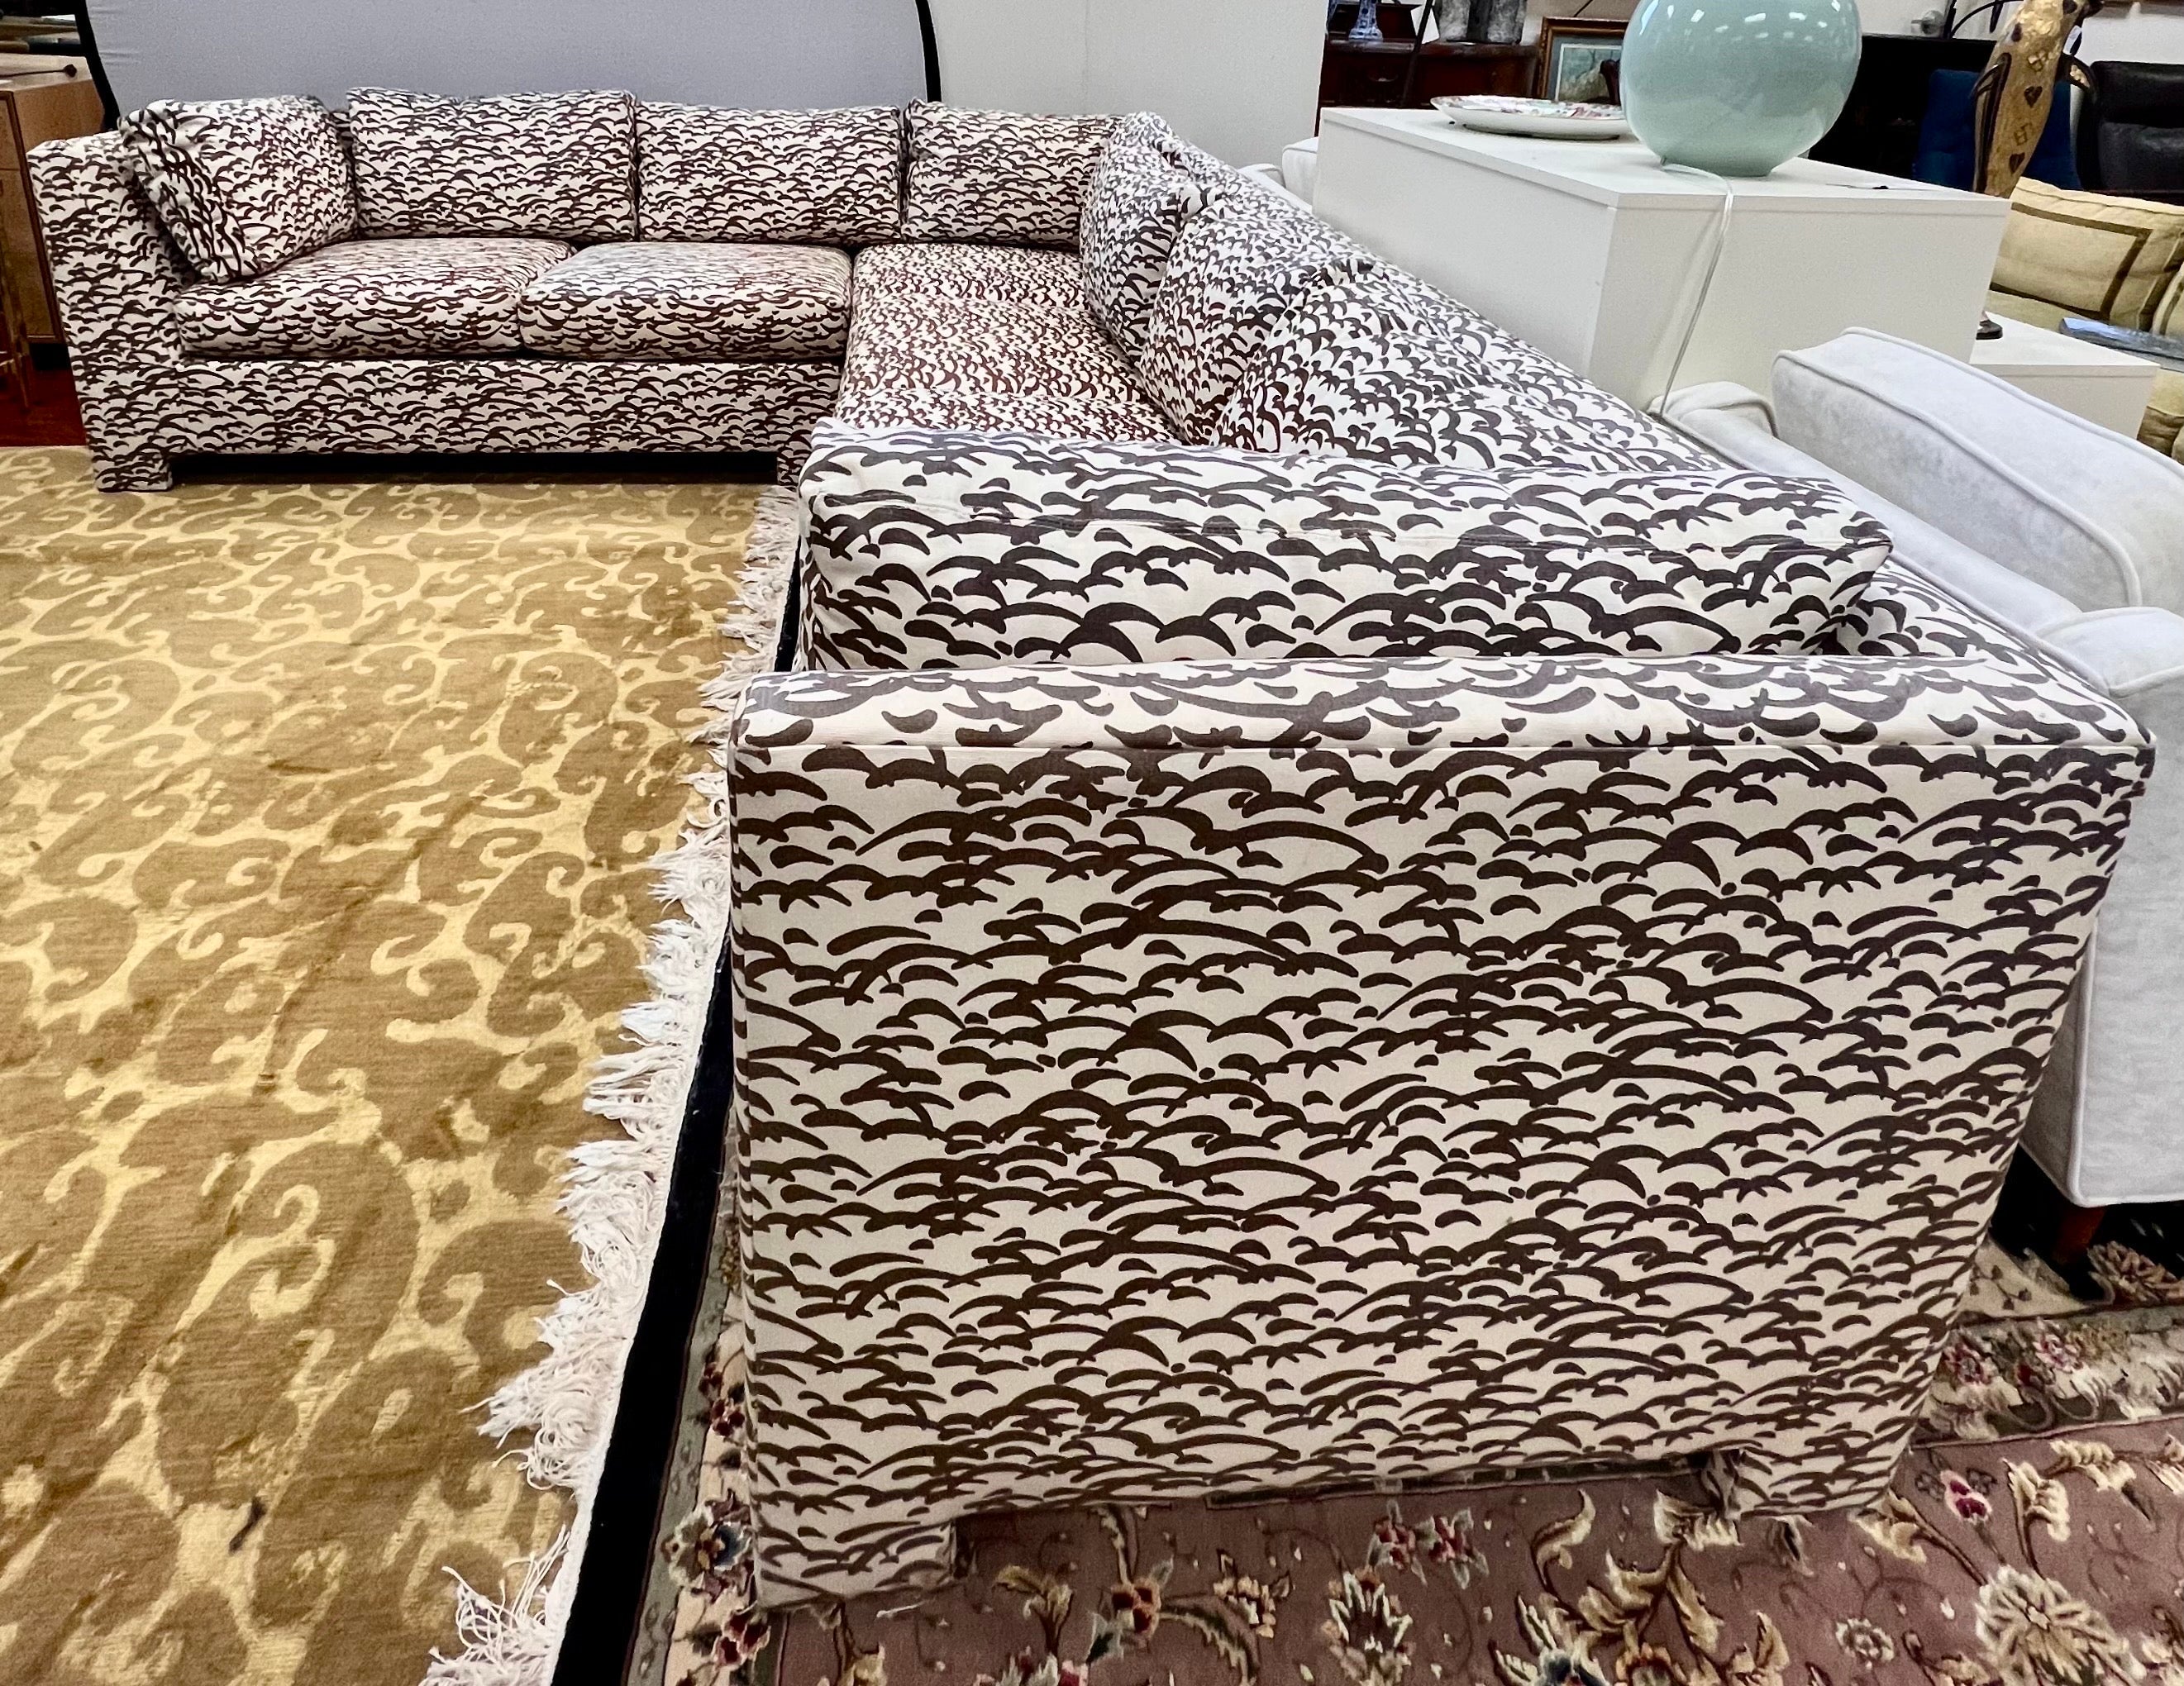 Stunning 2 pc mid century sectional sofa designed by Cy Mann upholstered in a brown and cream abstract print fabric. Retains its original fabric with no tears or rips but is slightly faded in places.
Measurements from back corner to left arm